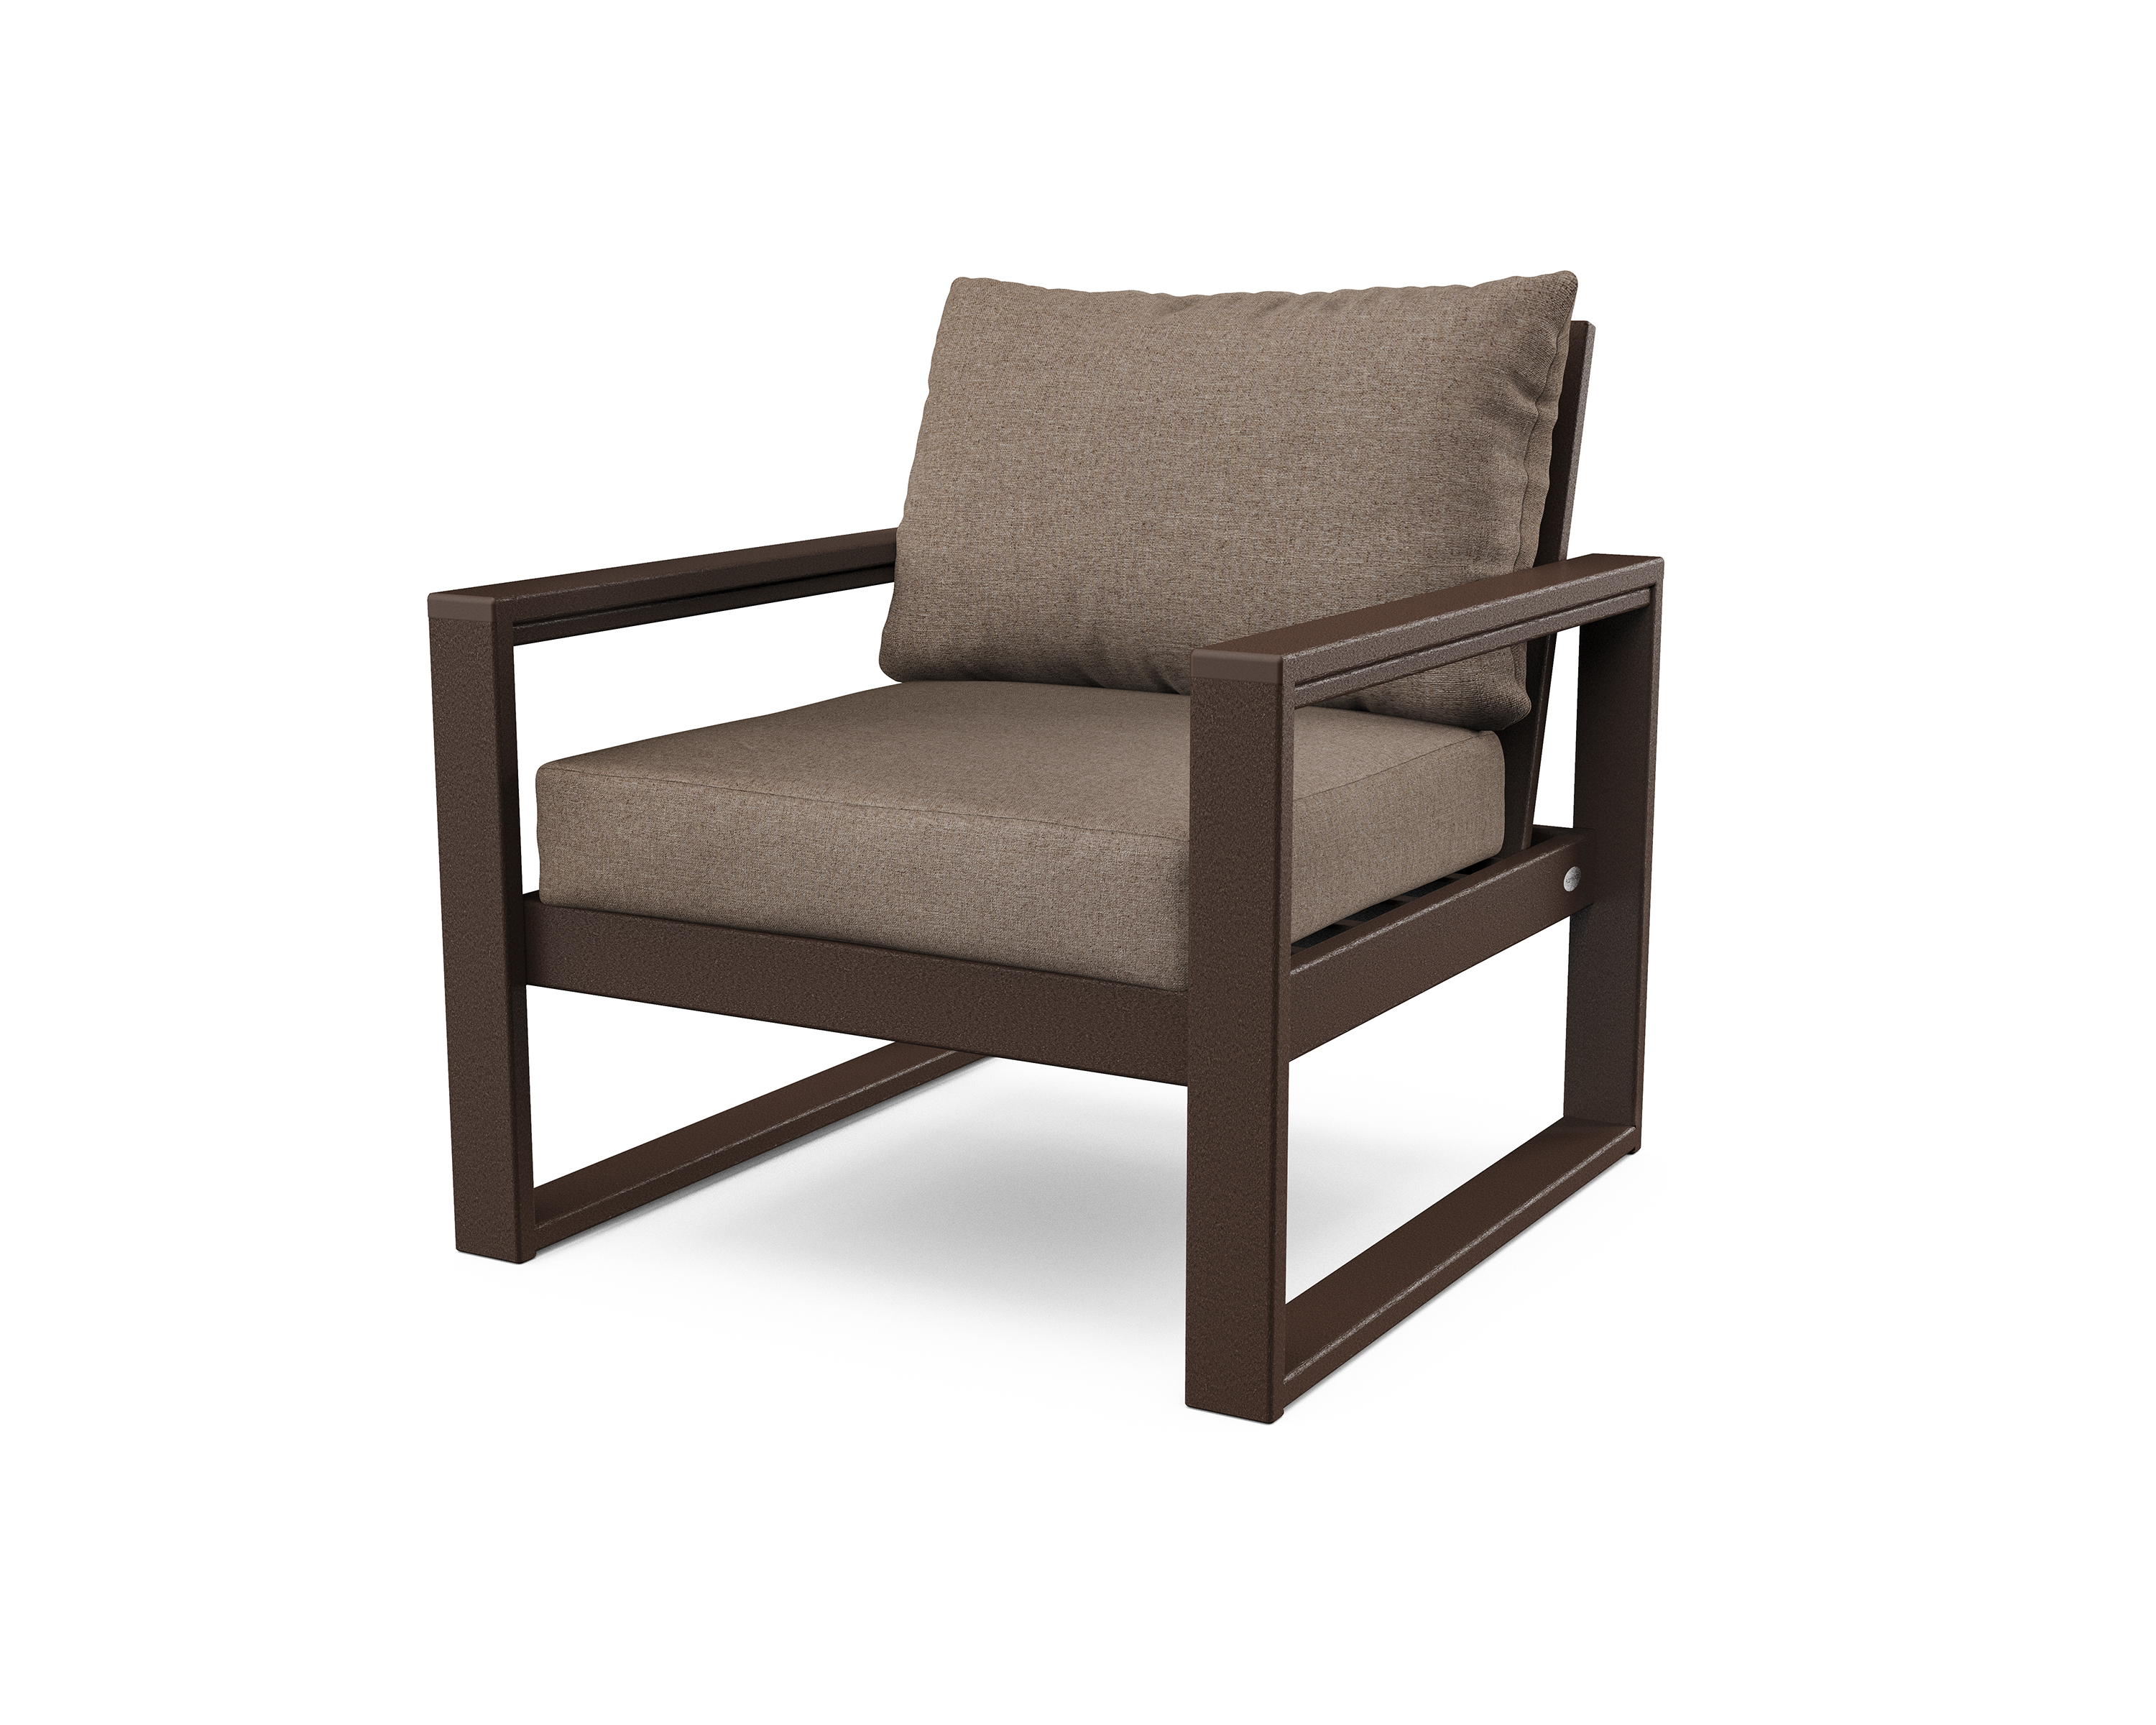 edge club chair in mahogany / spiced burlap product image